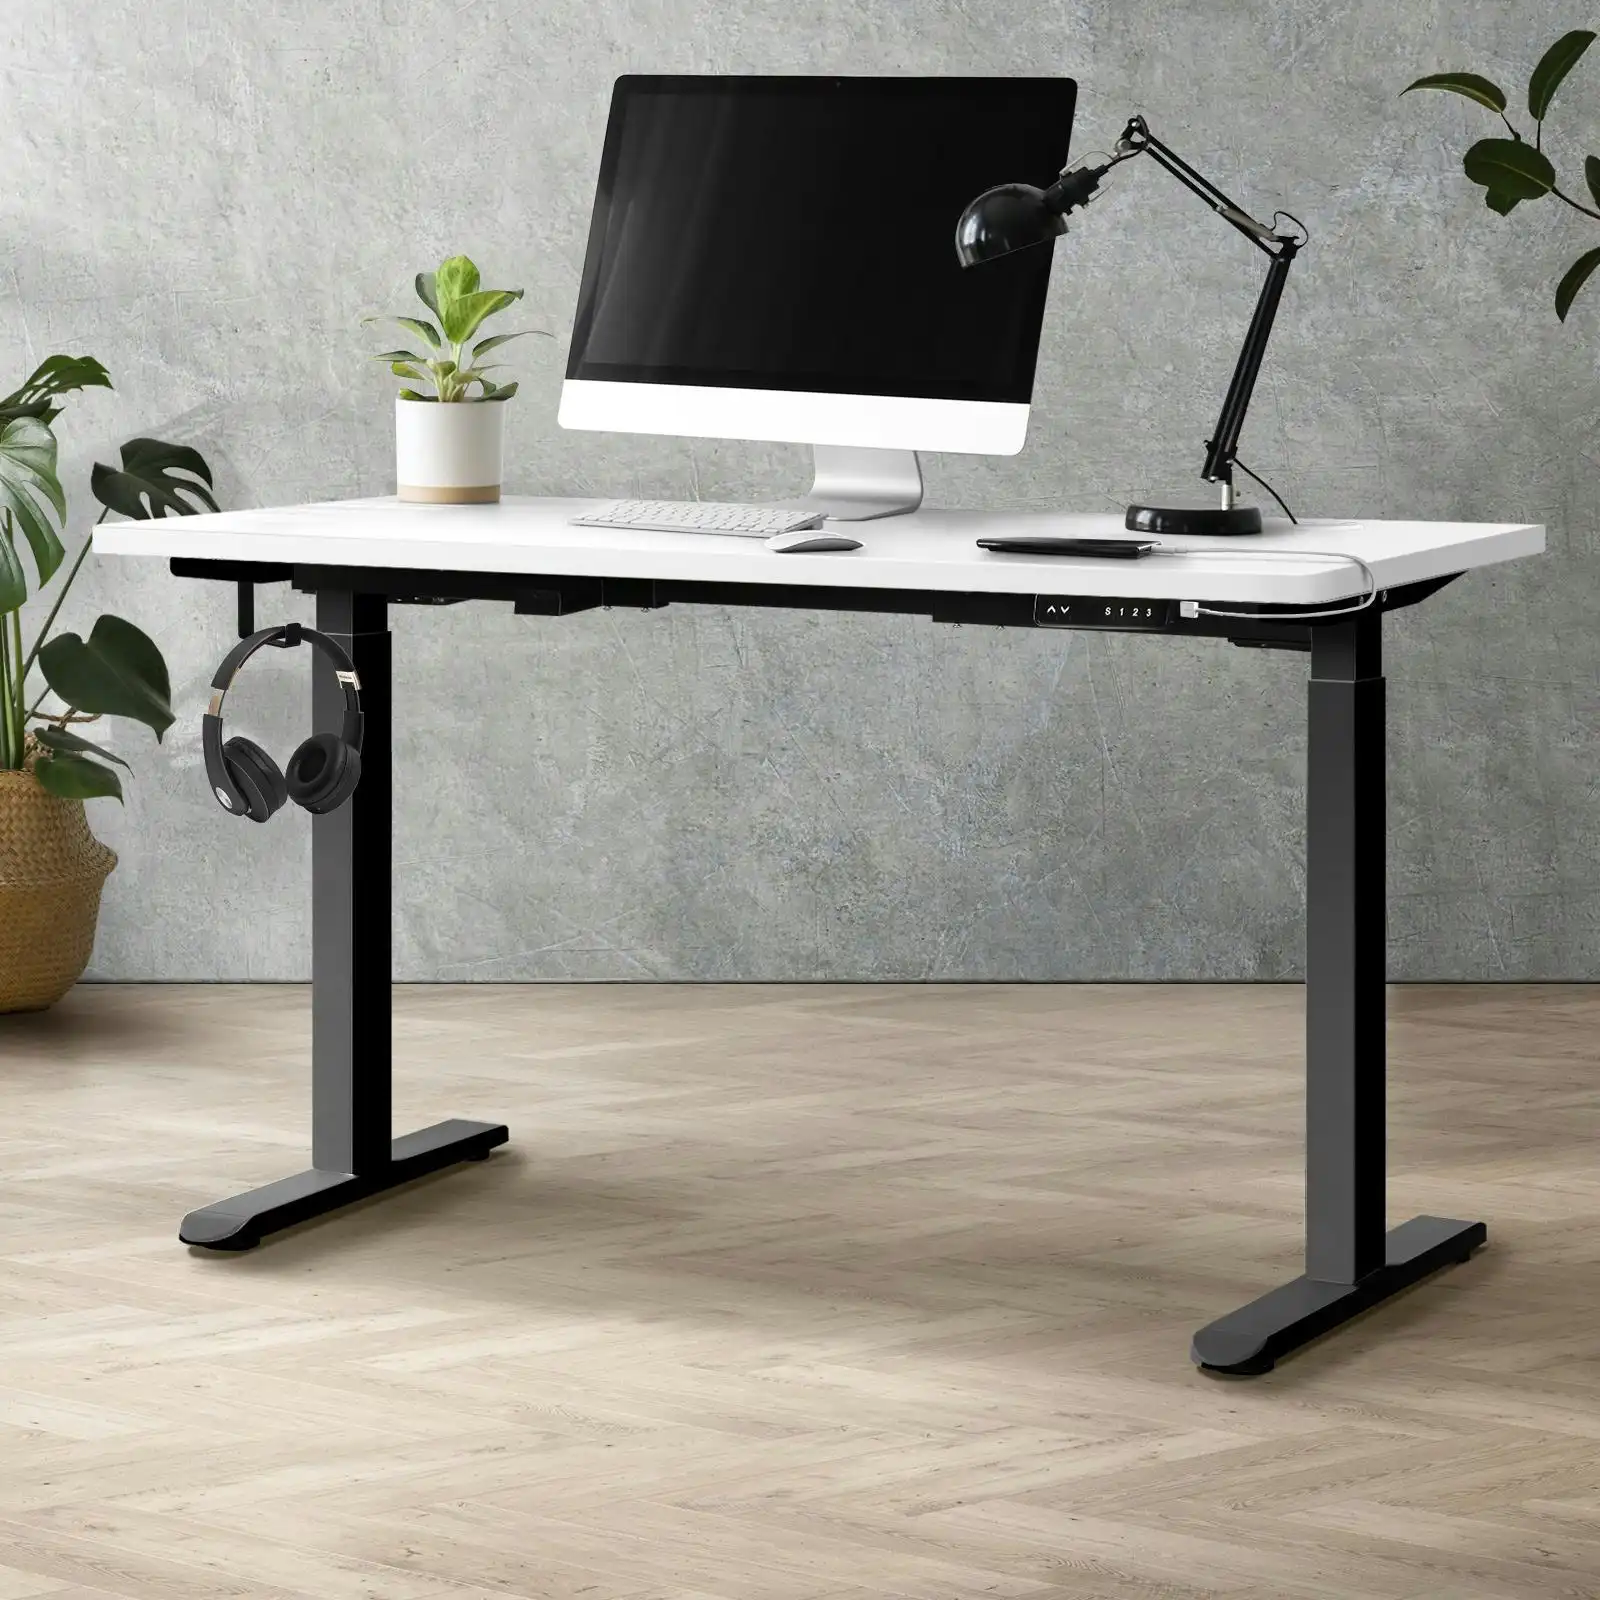 Oikiture 140cm Electric Standing Desk Dual Motor Black Frame White Desktop With USB&Type C Port